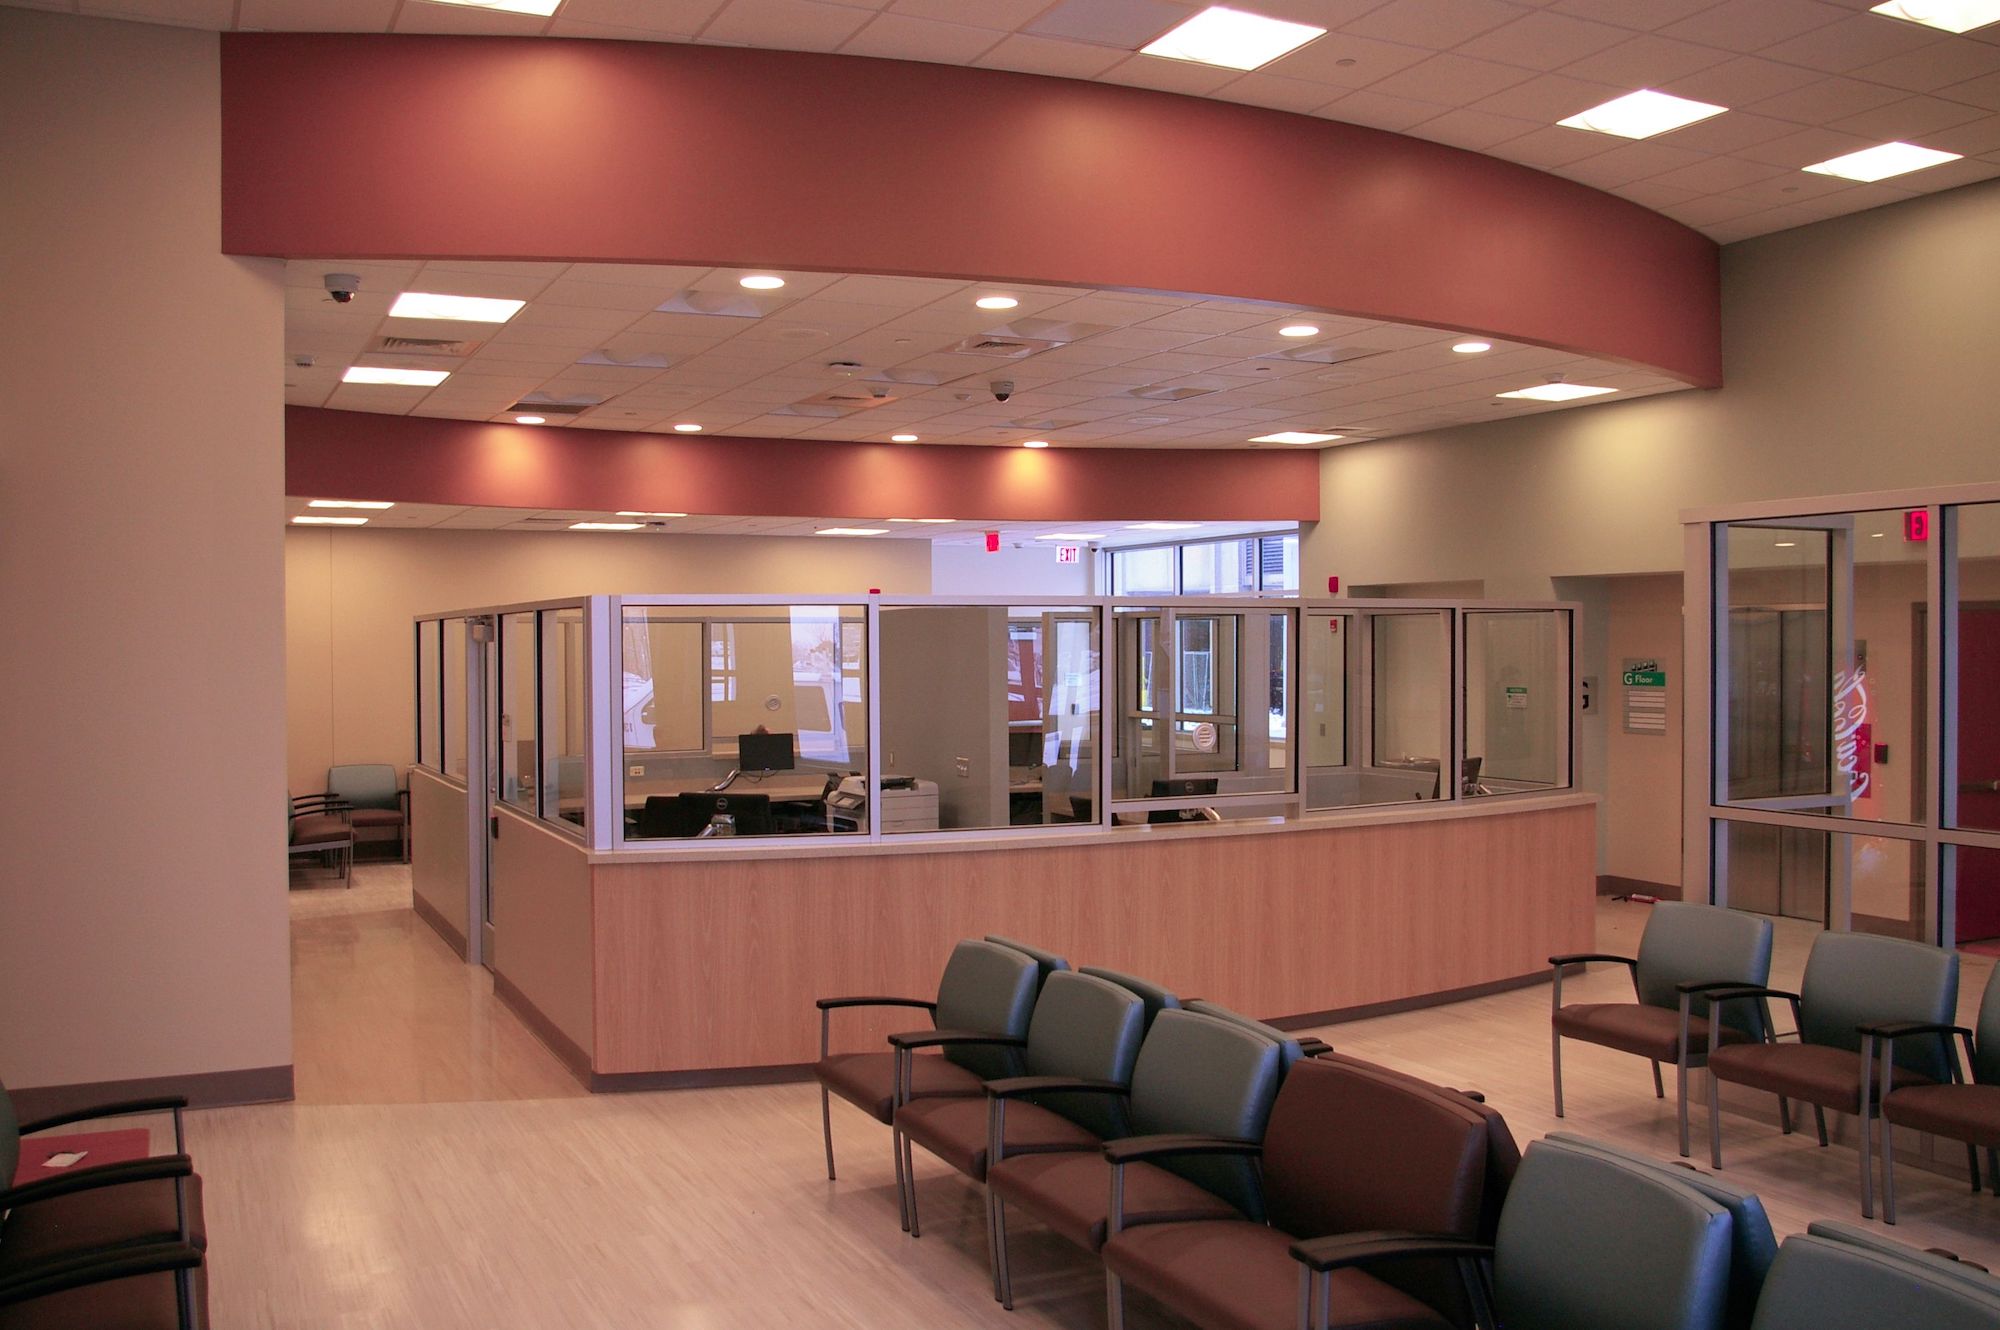 Erie County Behavioral Healthcare Center | Healthcare Projects aplususa